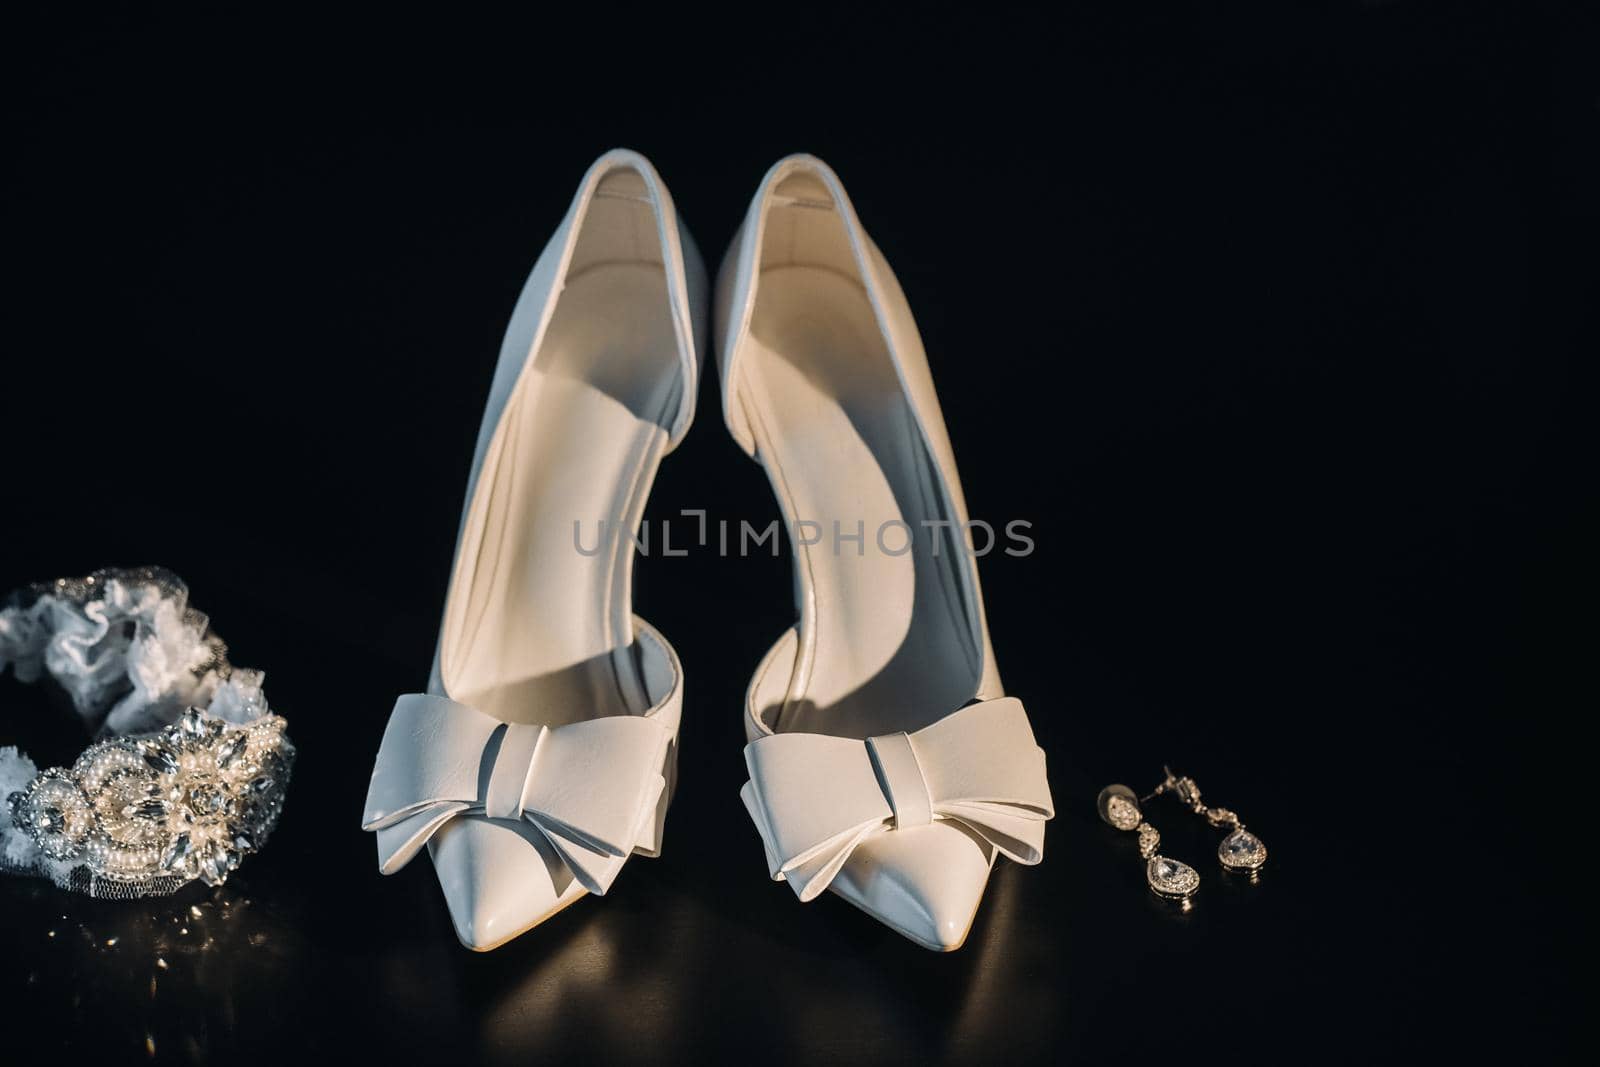 white wedding shoes and garter belt with earrings on a black background.